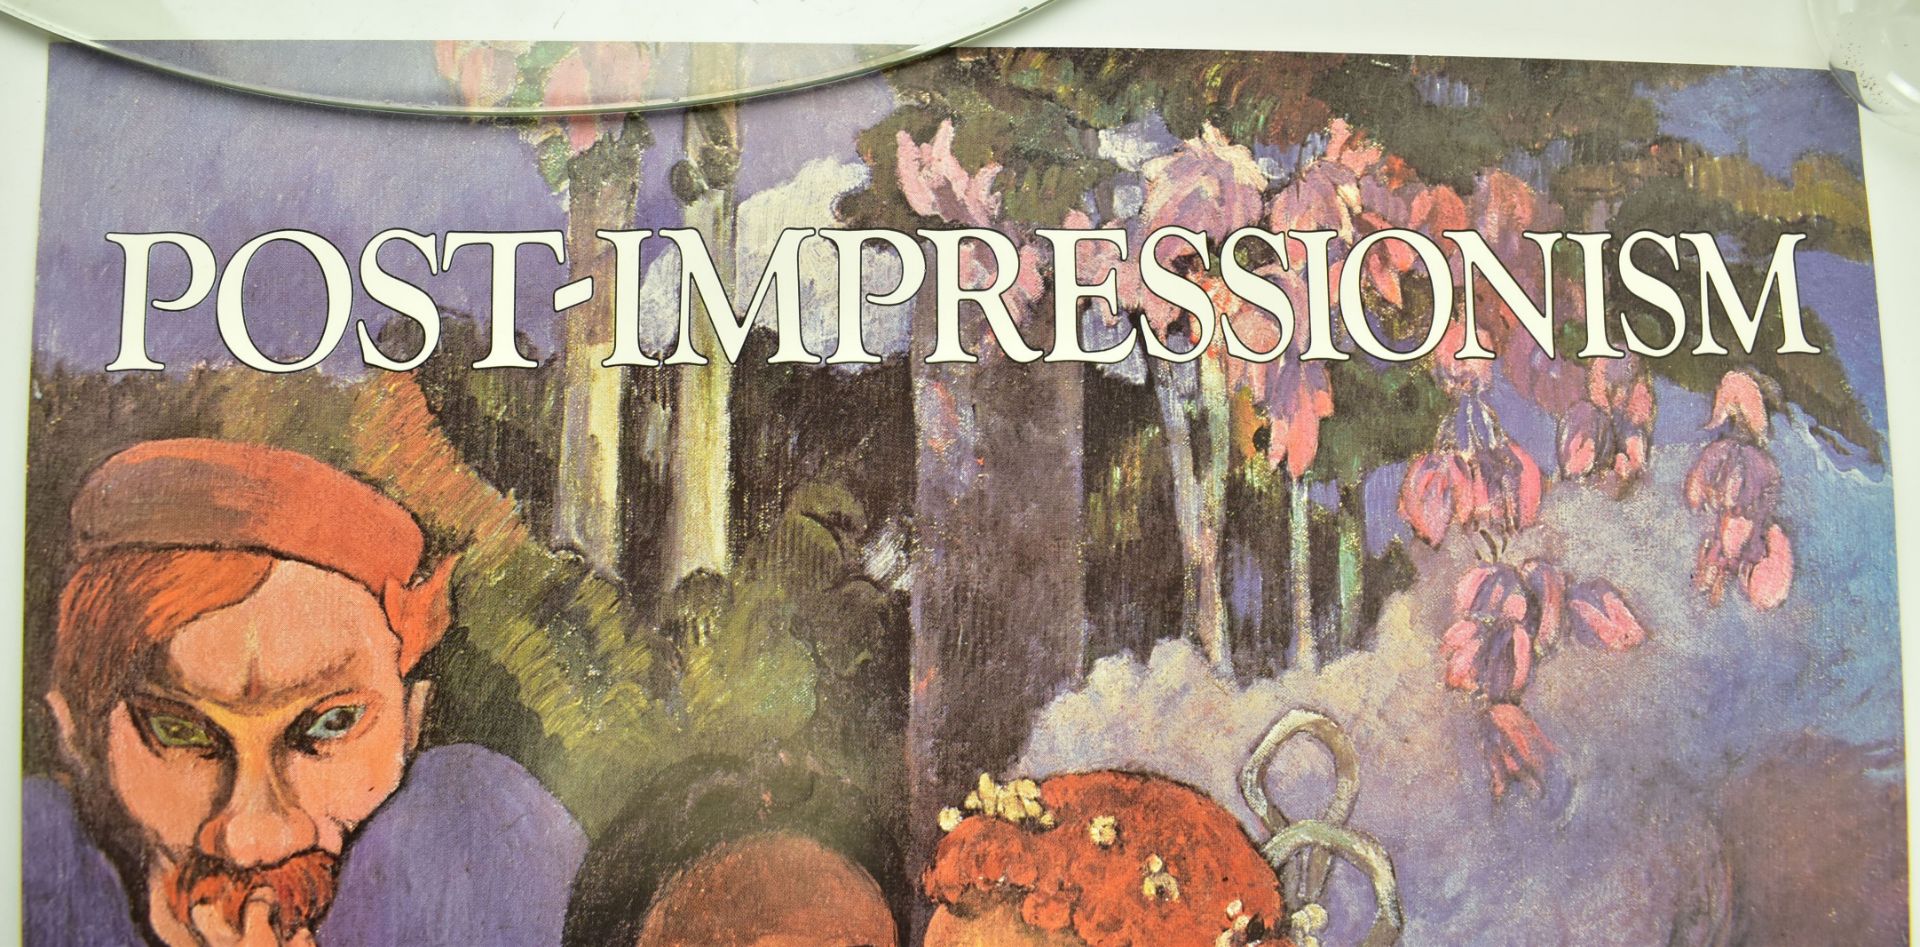 PAUL GAUGUIN - POST-IMPRESSIONISM 1980 EXHIBITION POSTER - Image 2 of 3